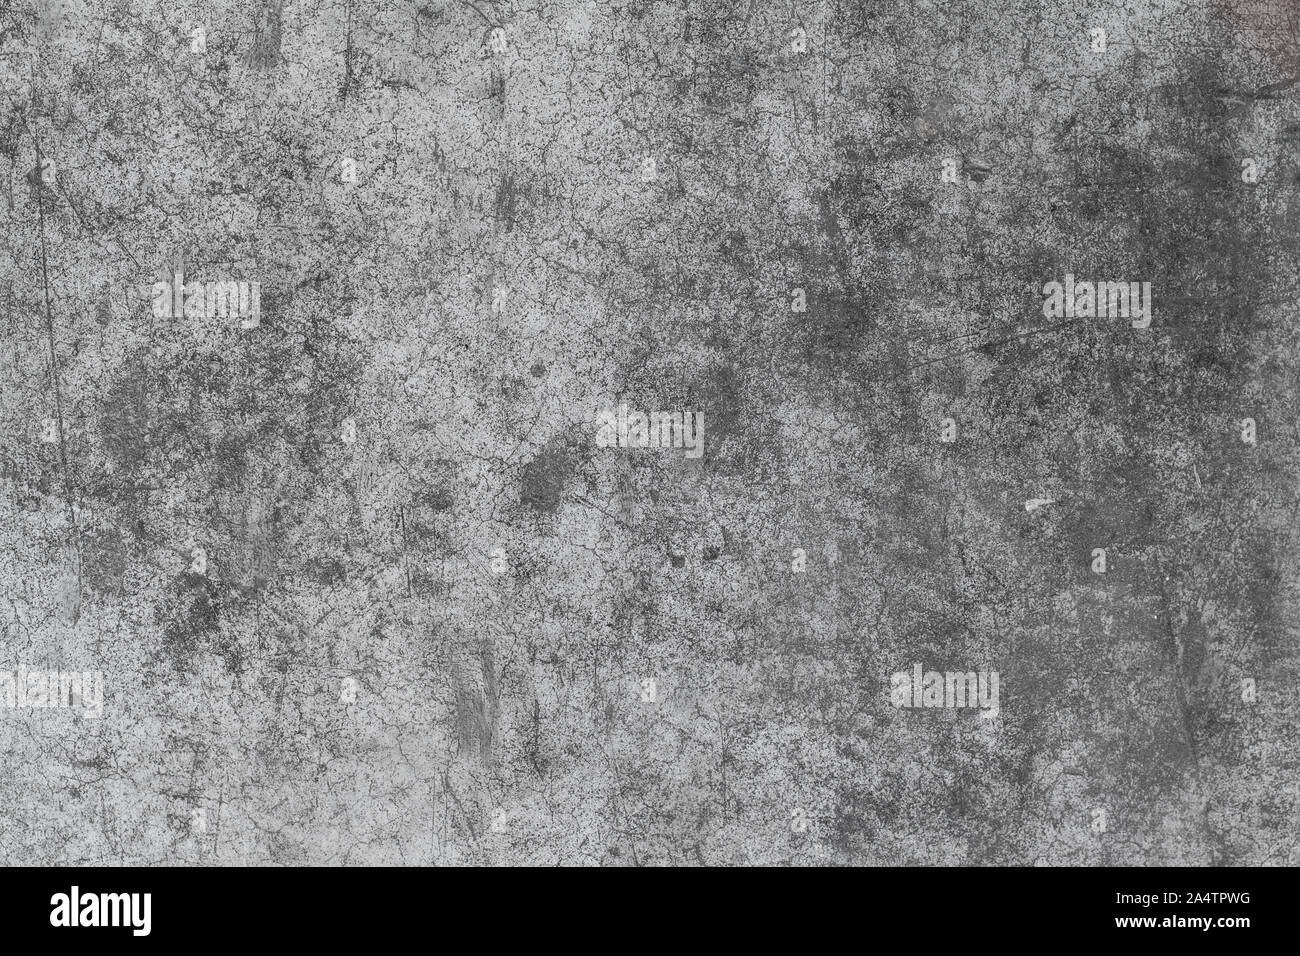 Gray Scratched Cement Floor Texture In A Close Up View Stock Photo Alamy